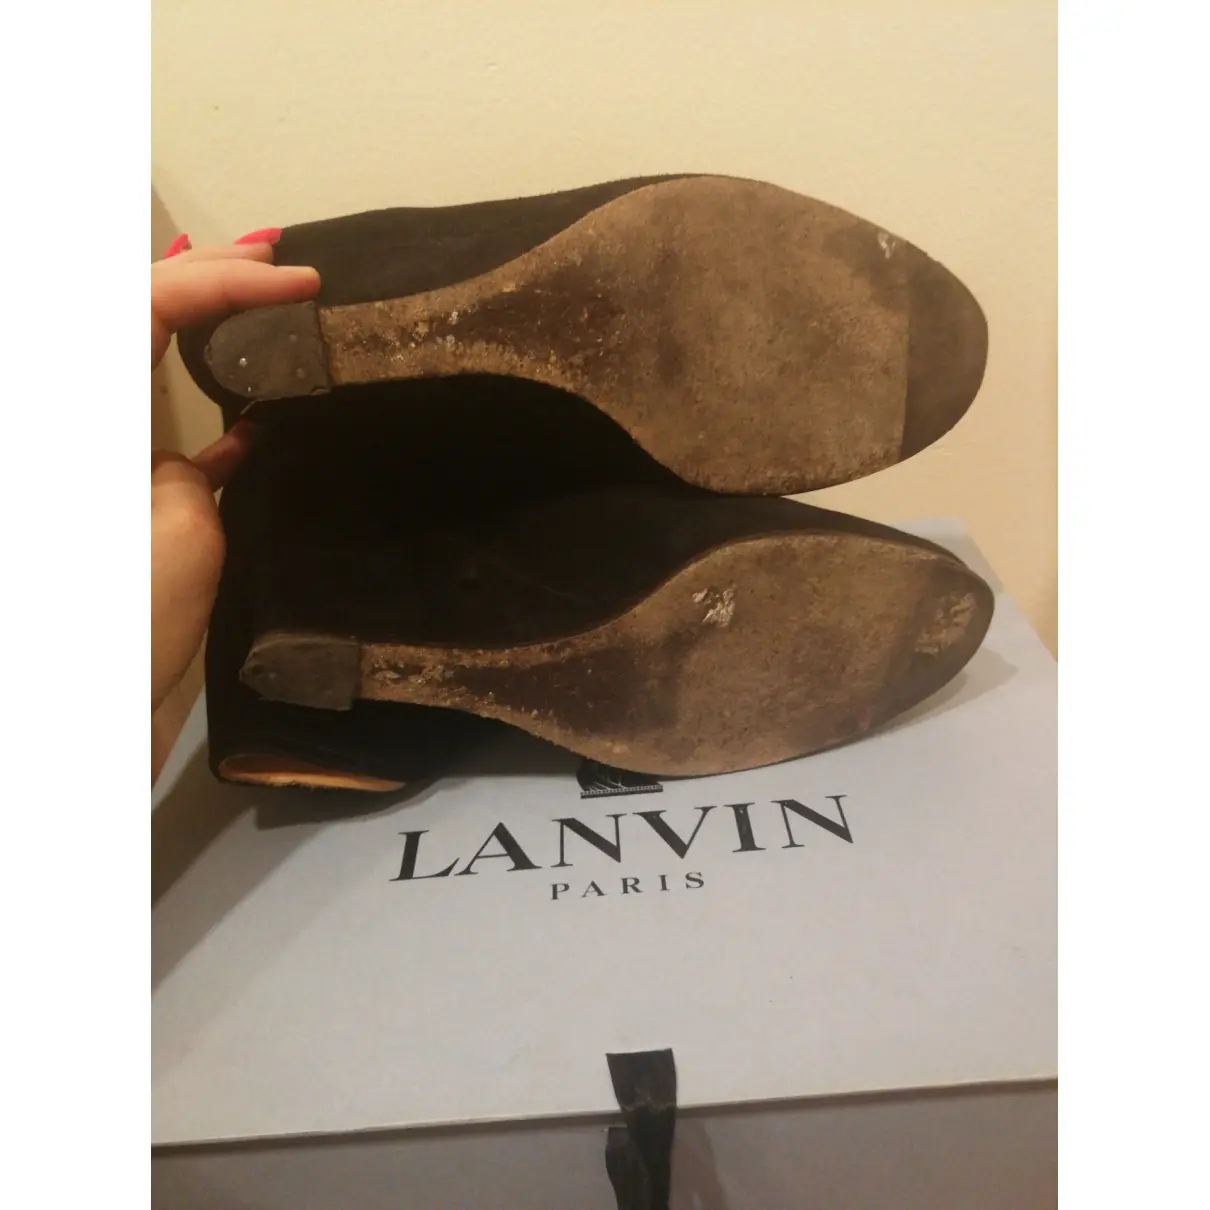 Buy Lanvin Leather boots online